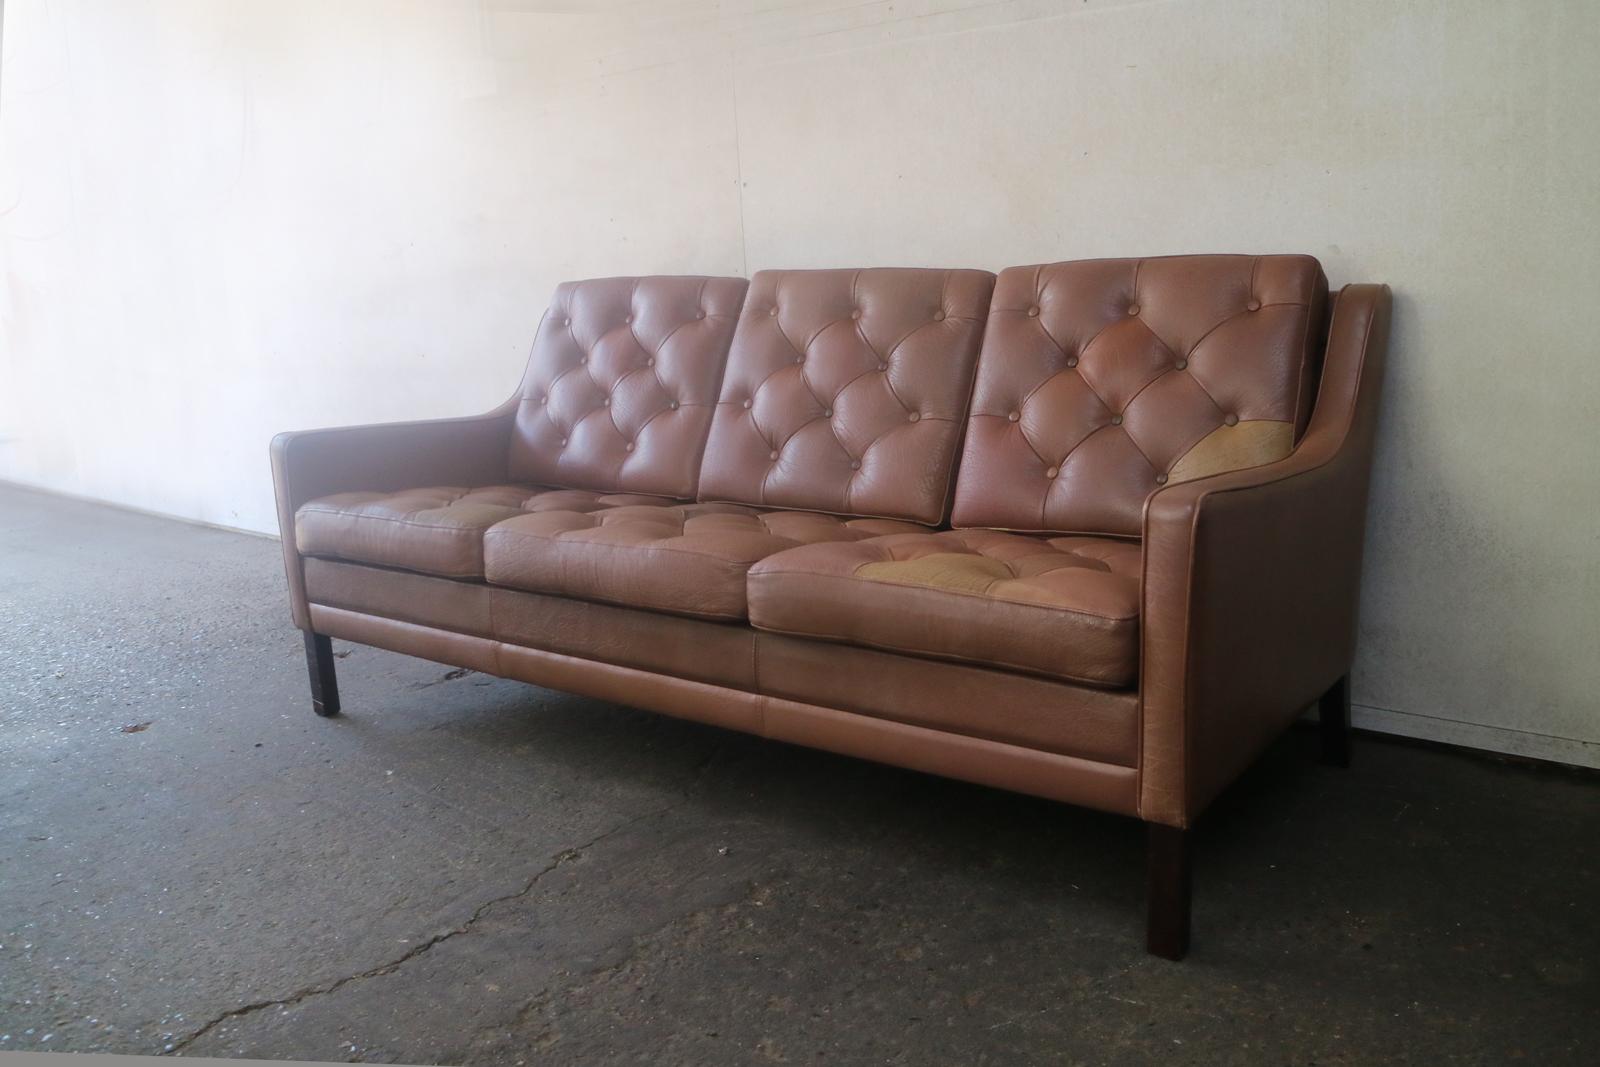 A handsome Danish sofa similar in style to the designs of Borge Mogensen. The diamond shaped sections are individual pieces of leather, with different colours appearing randomly throughout.

Country of origin: Denmark
Date of manufacture: